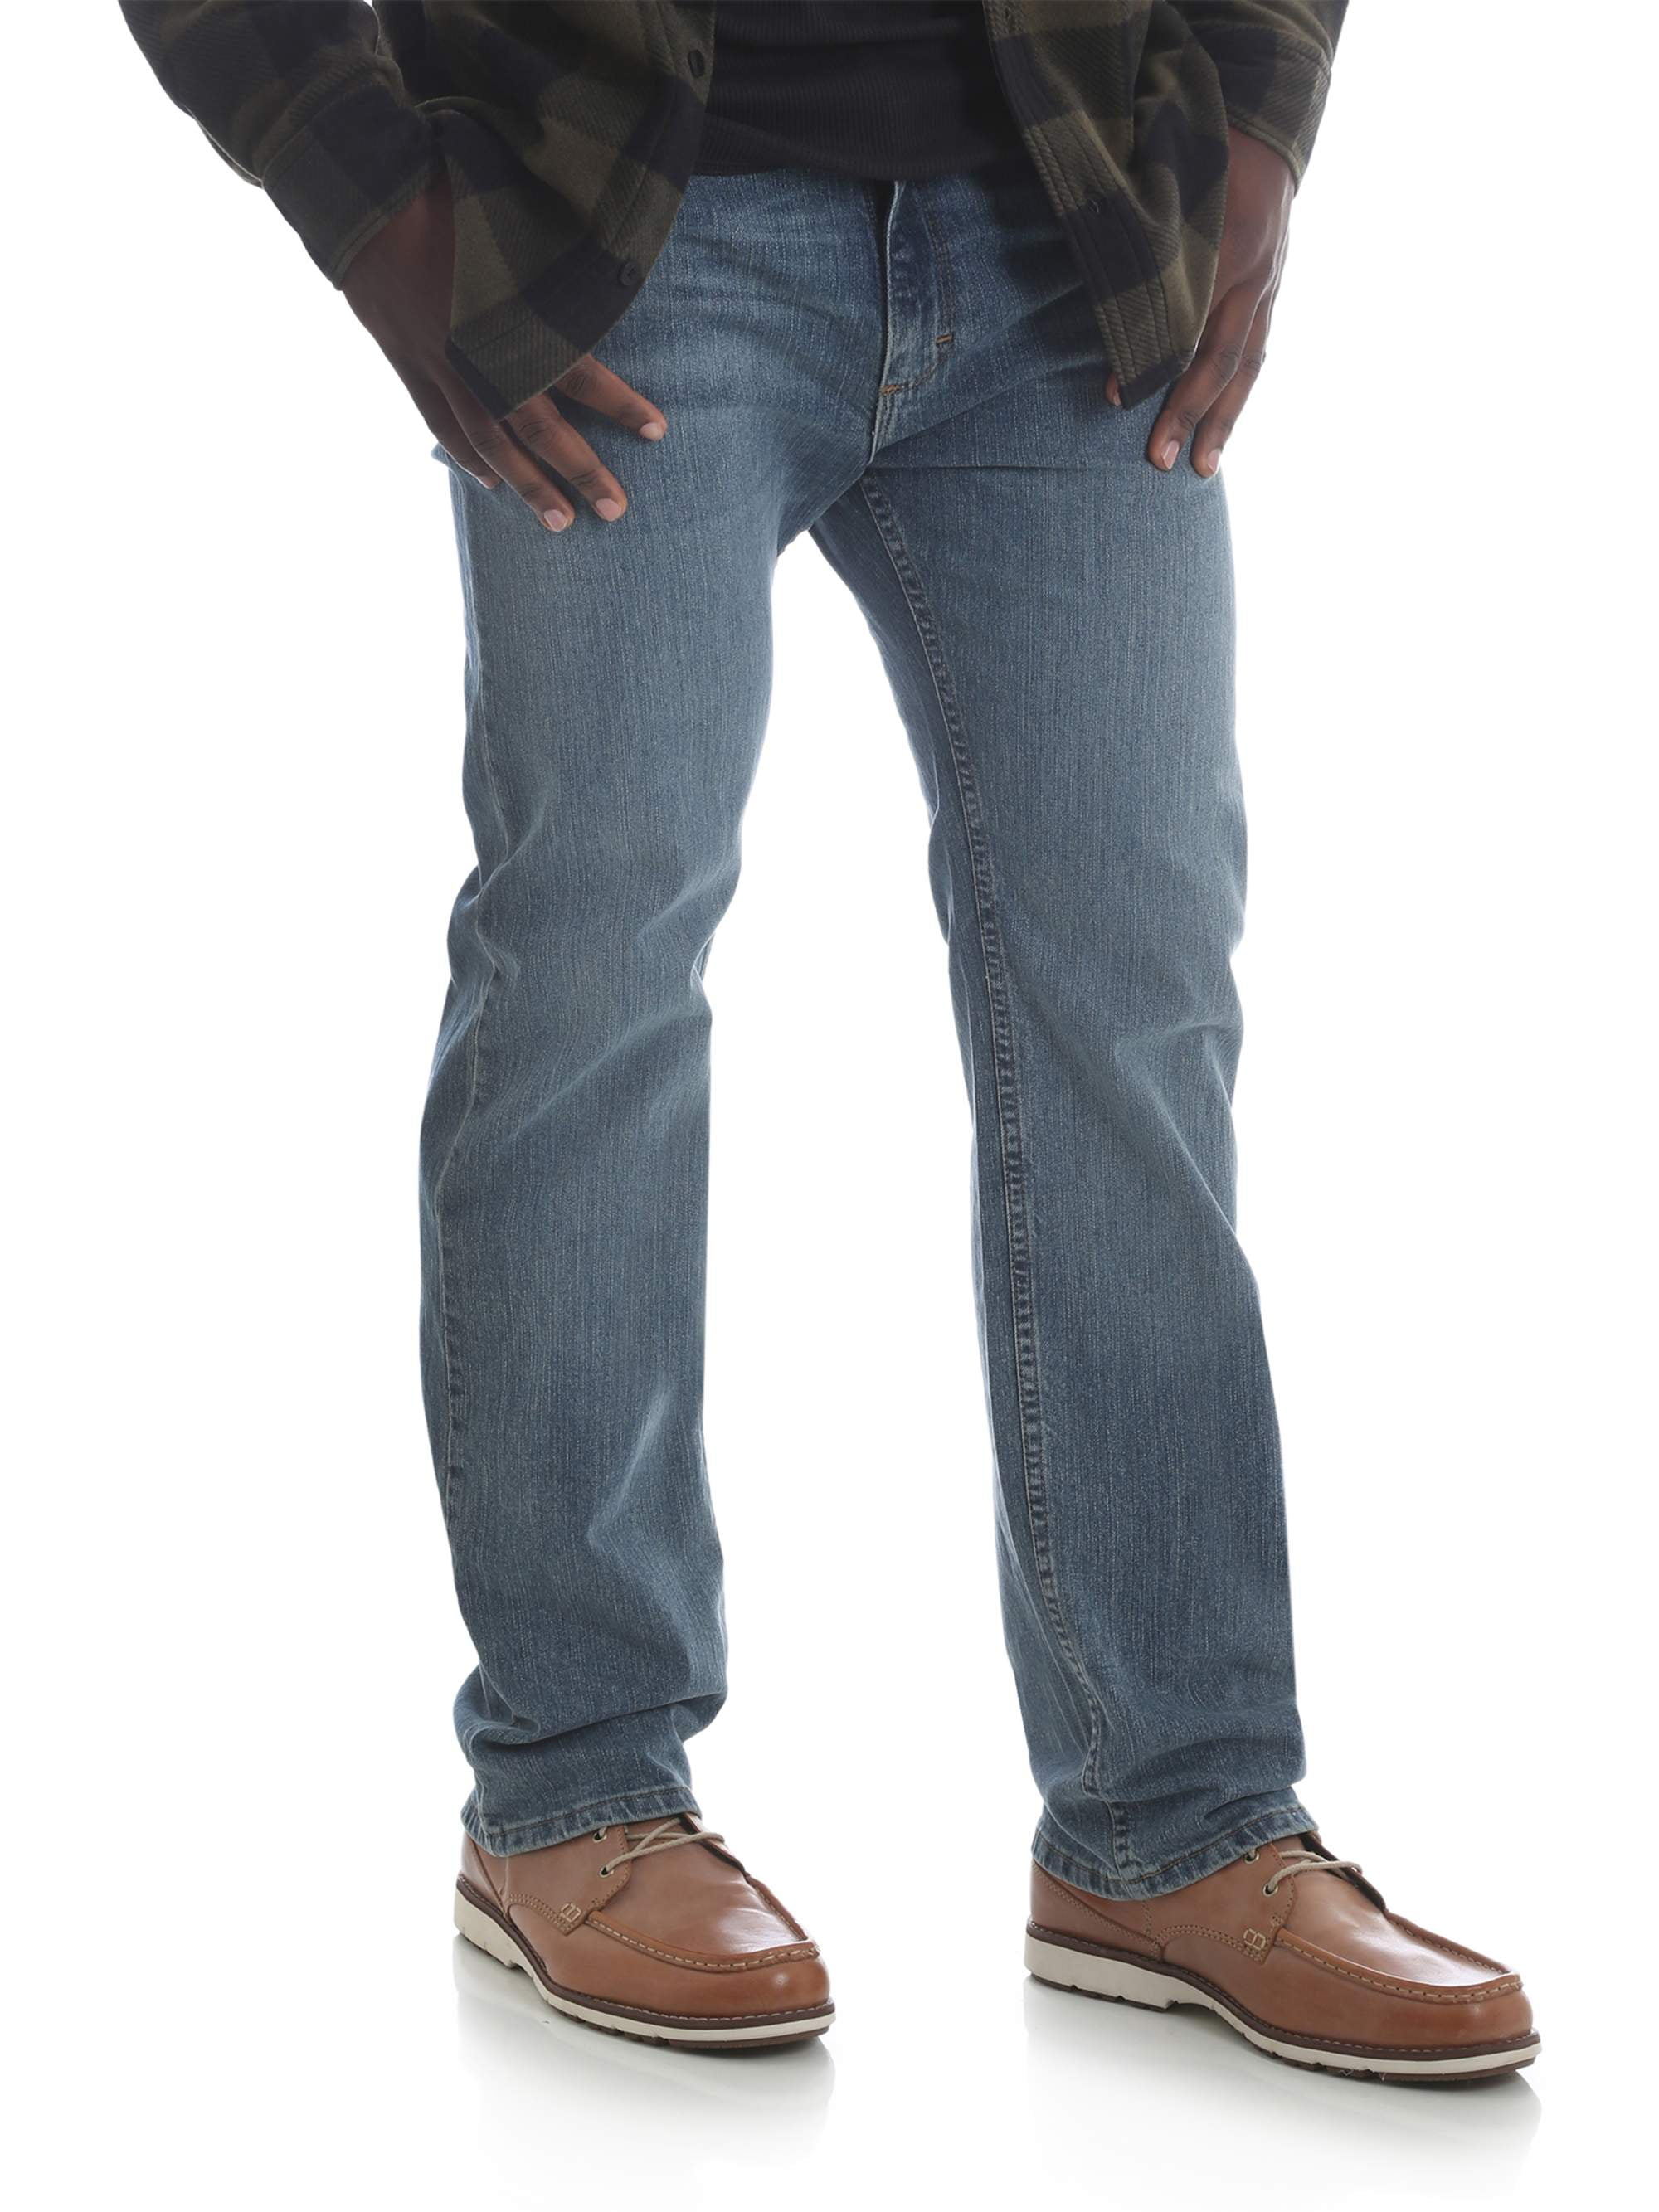 Wrangler Men's and Big Men's Straight Fit Jeans with Flex 